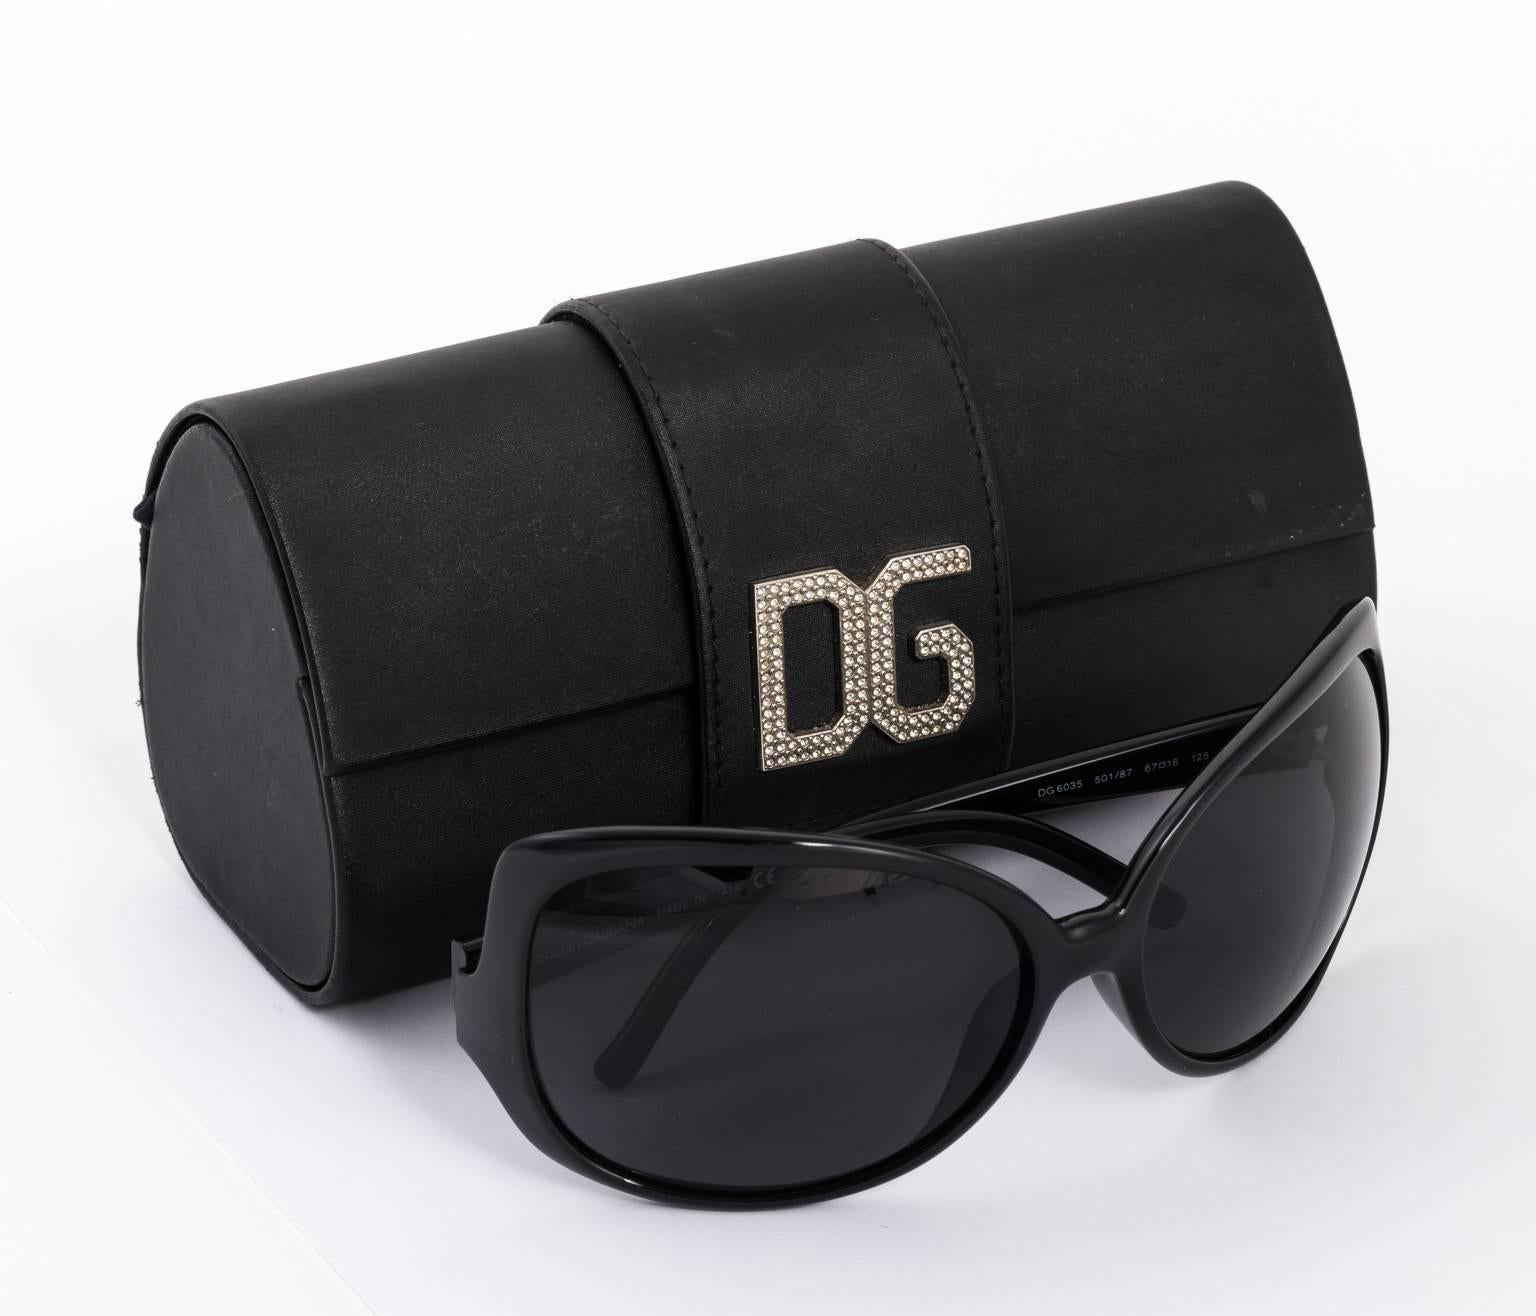  Black Dolce and Gabbana sunglasses For Sale 7